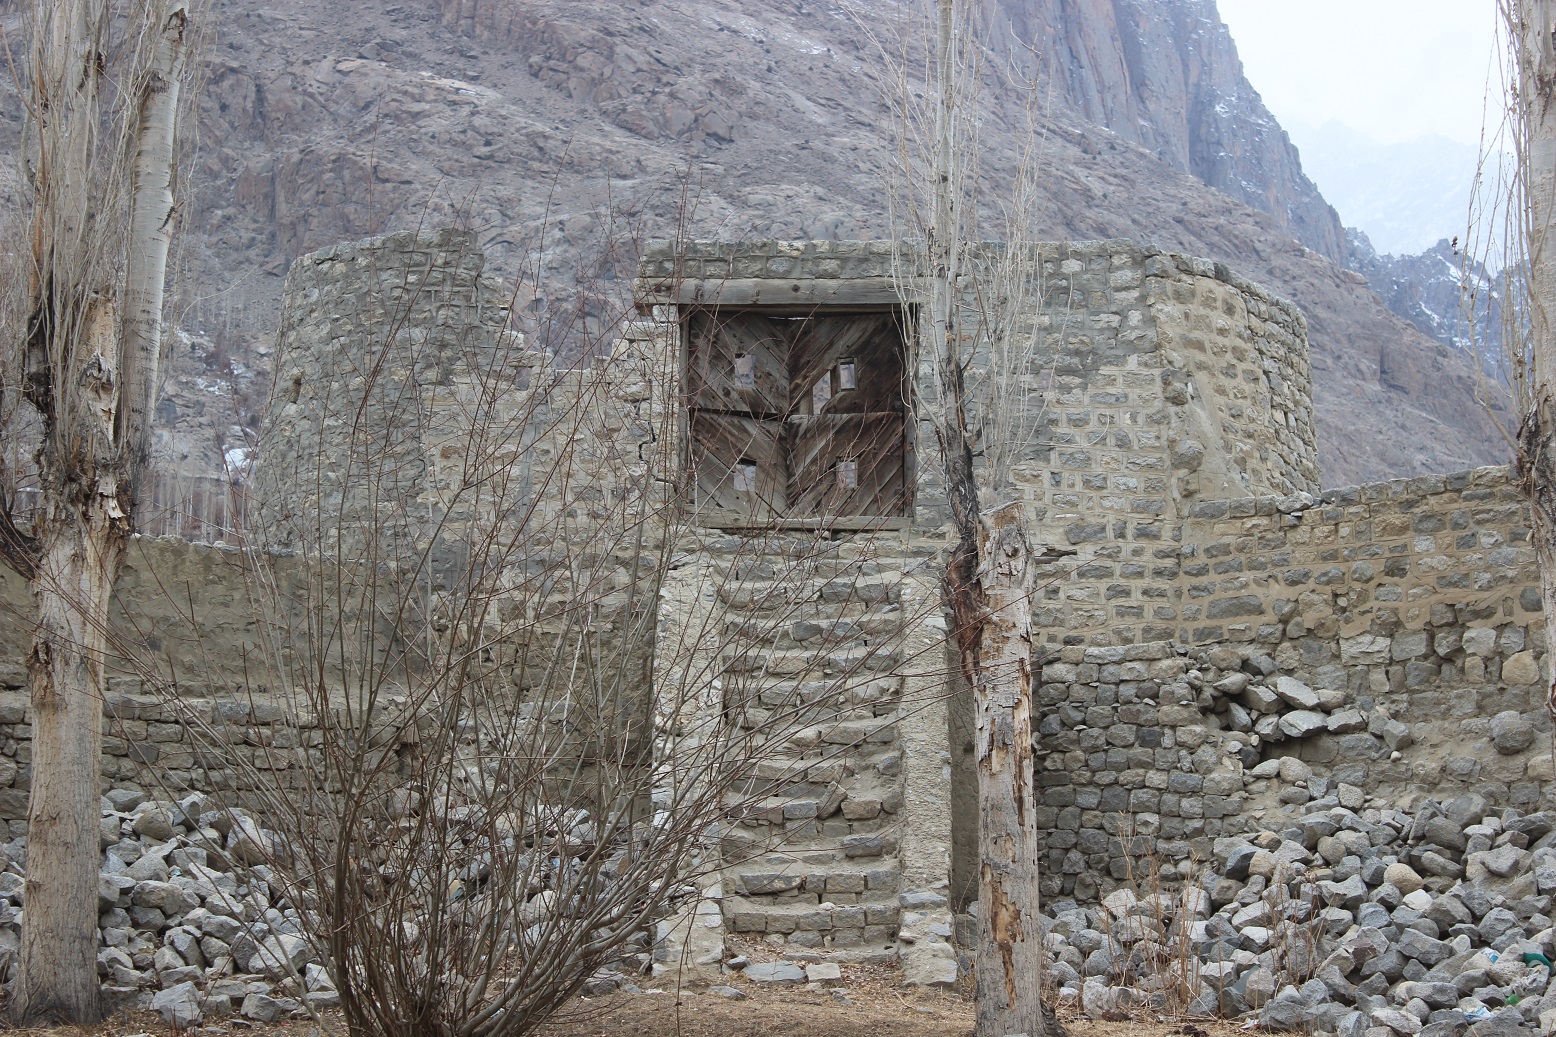 Gupis-Fort-in-Ghizer-District-PAMIR-TIMES-6.jpg